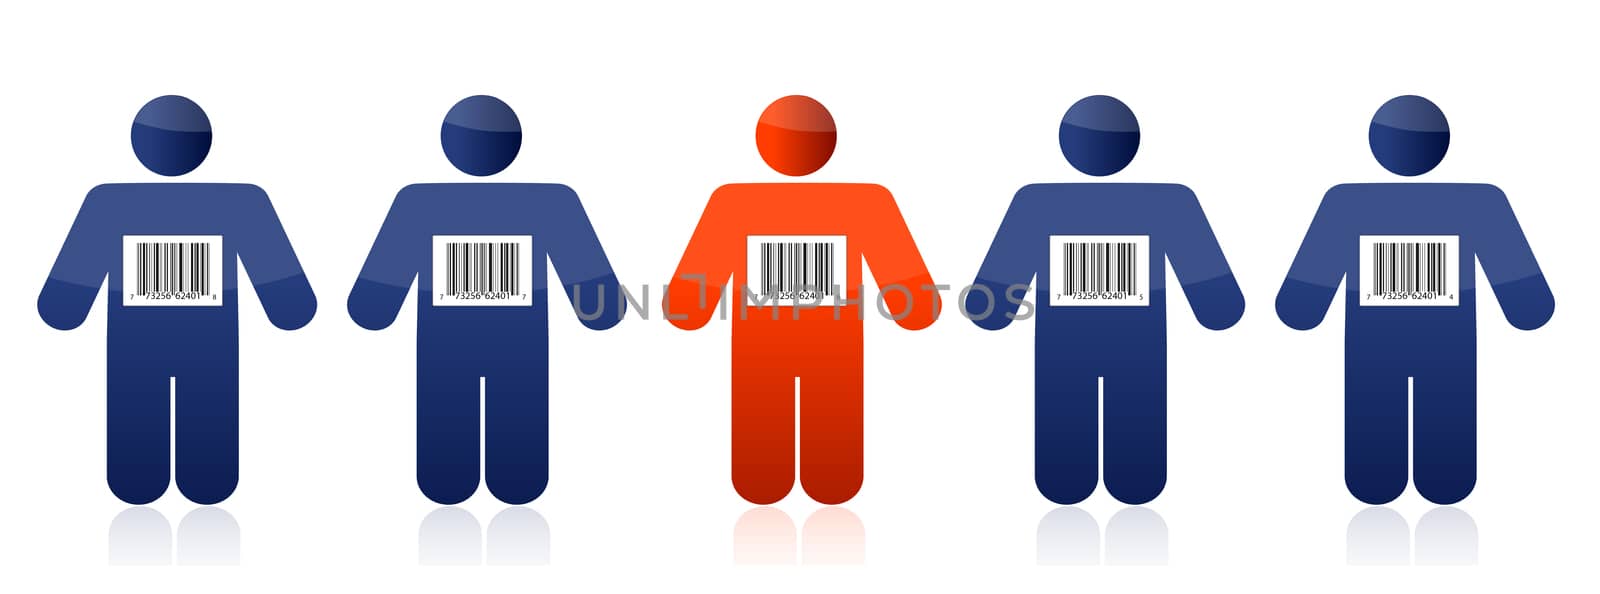 Bar code and people illustration design over white by alexmillos